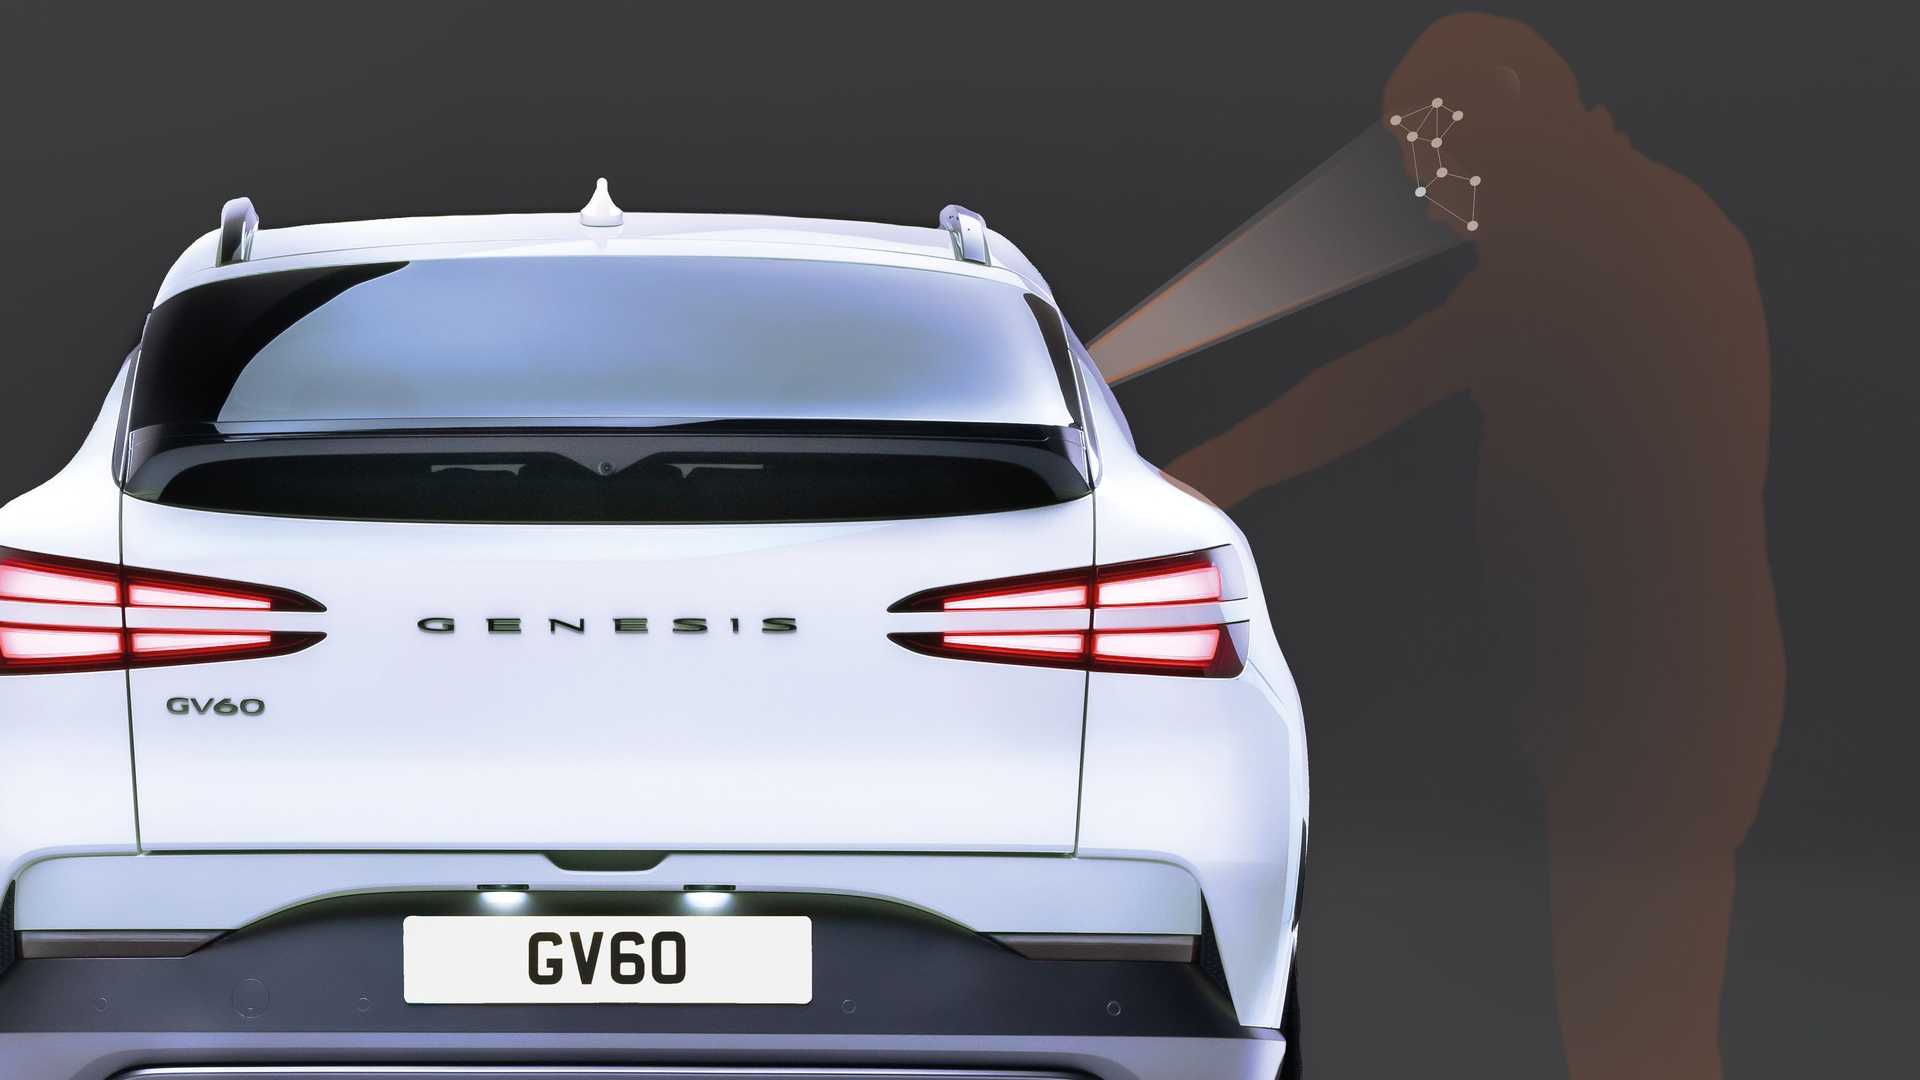 Genesis GV60 face recognition